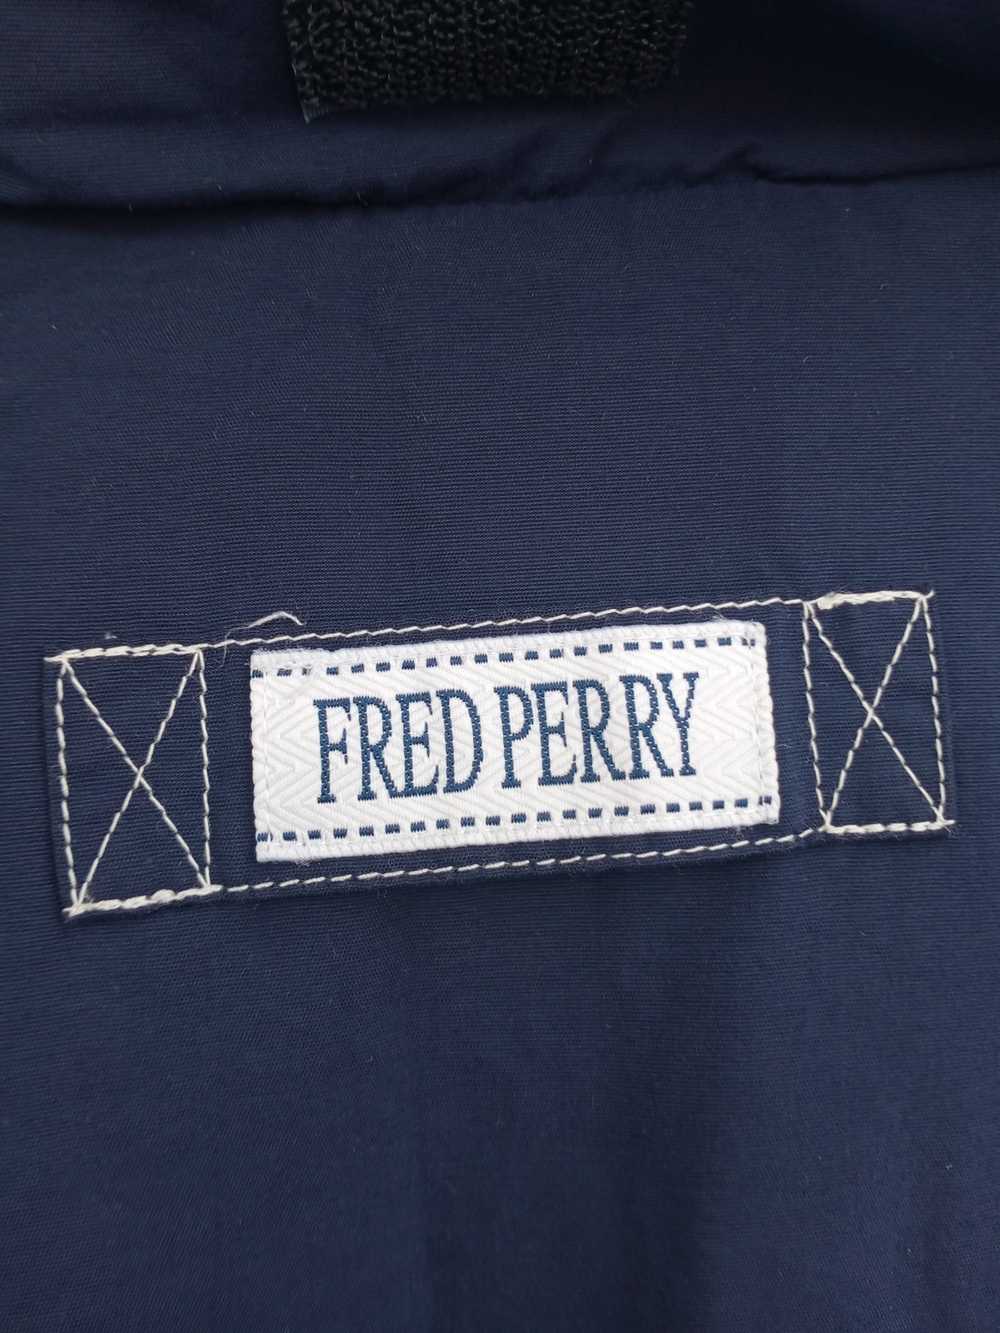 Fred Perry × Japanese Brand Fred Perry hoodies li… - image 11